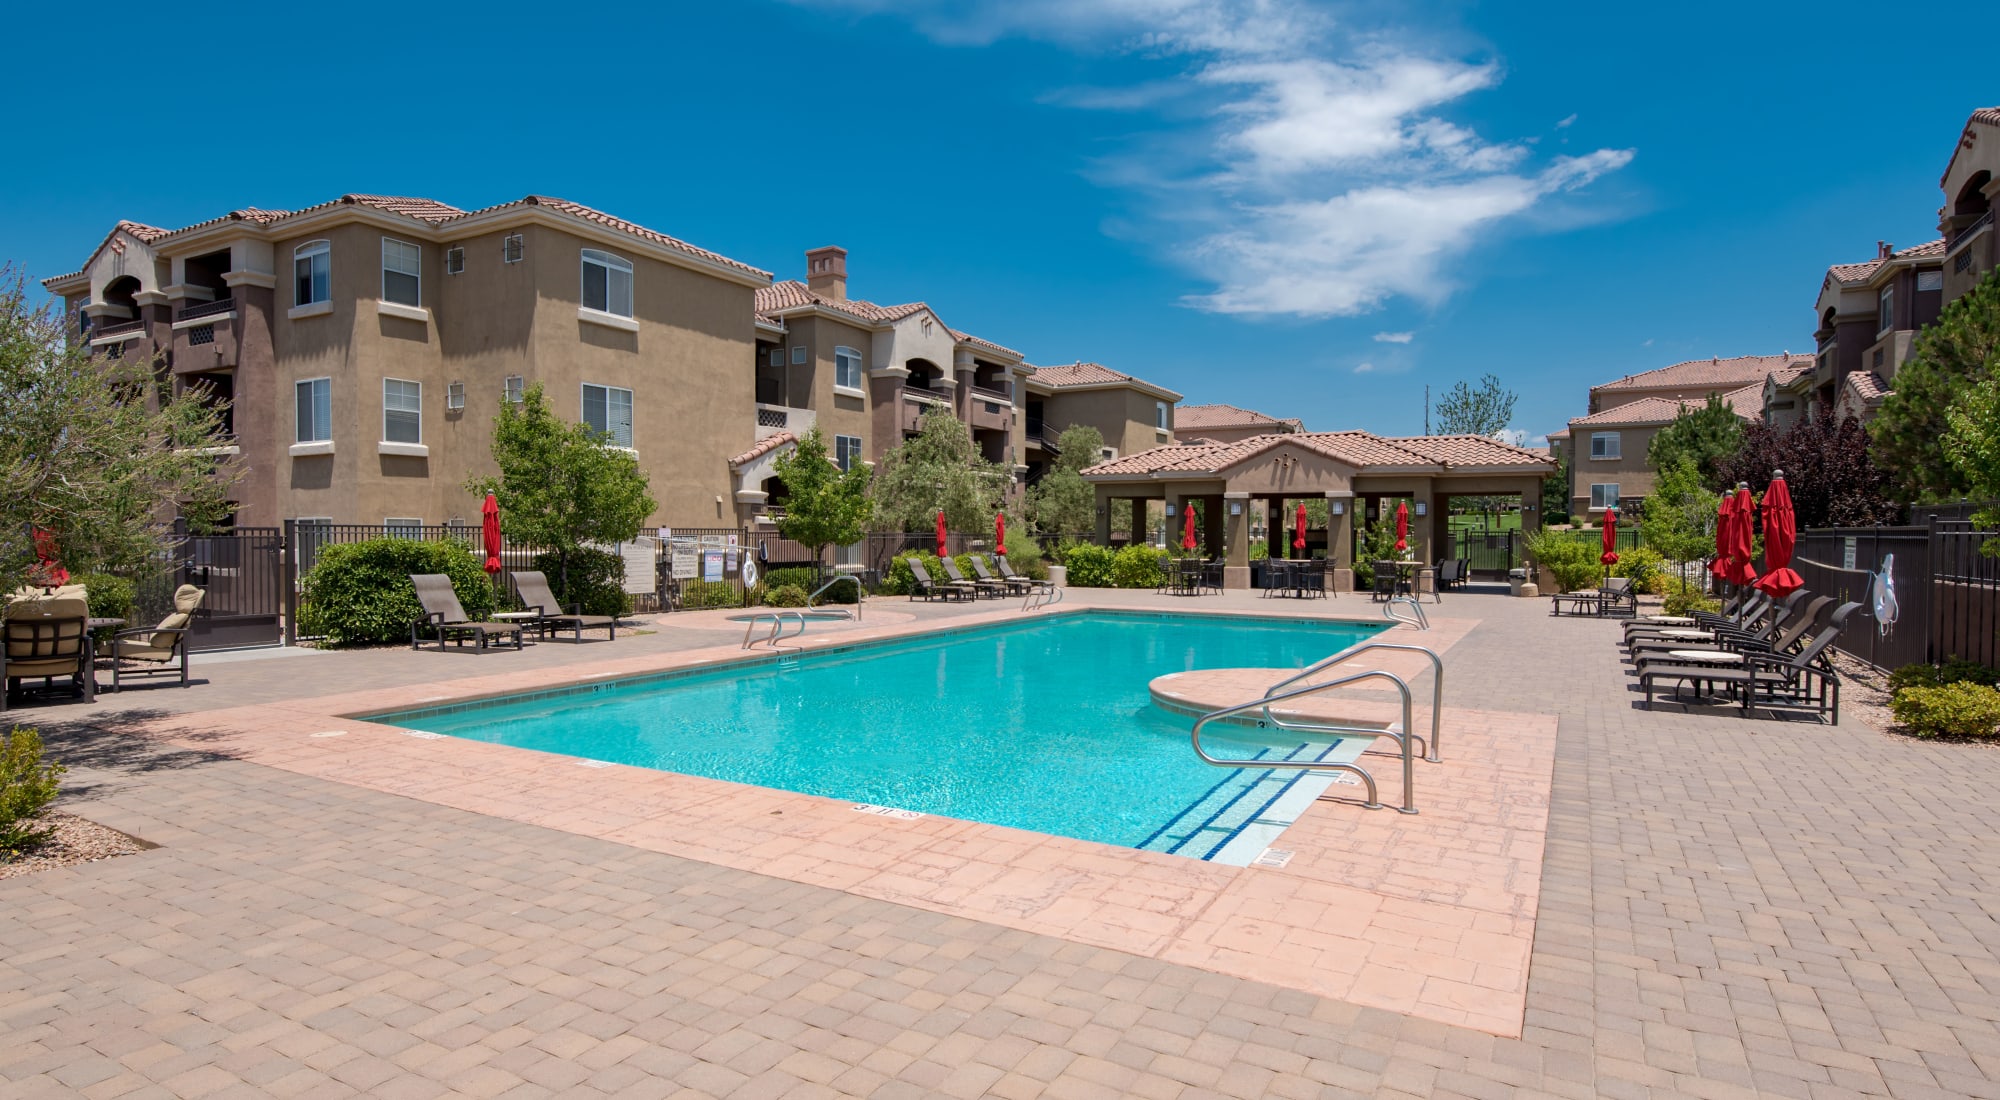 Apply to live at Broadstone Towne Center in Albuquerque, New Mexico